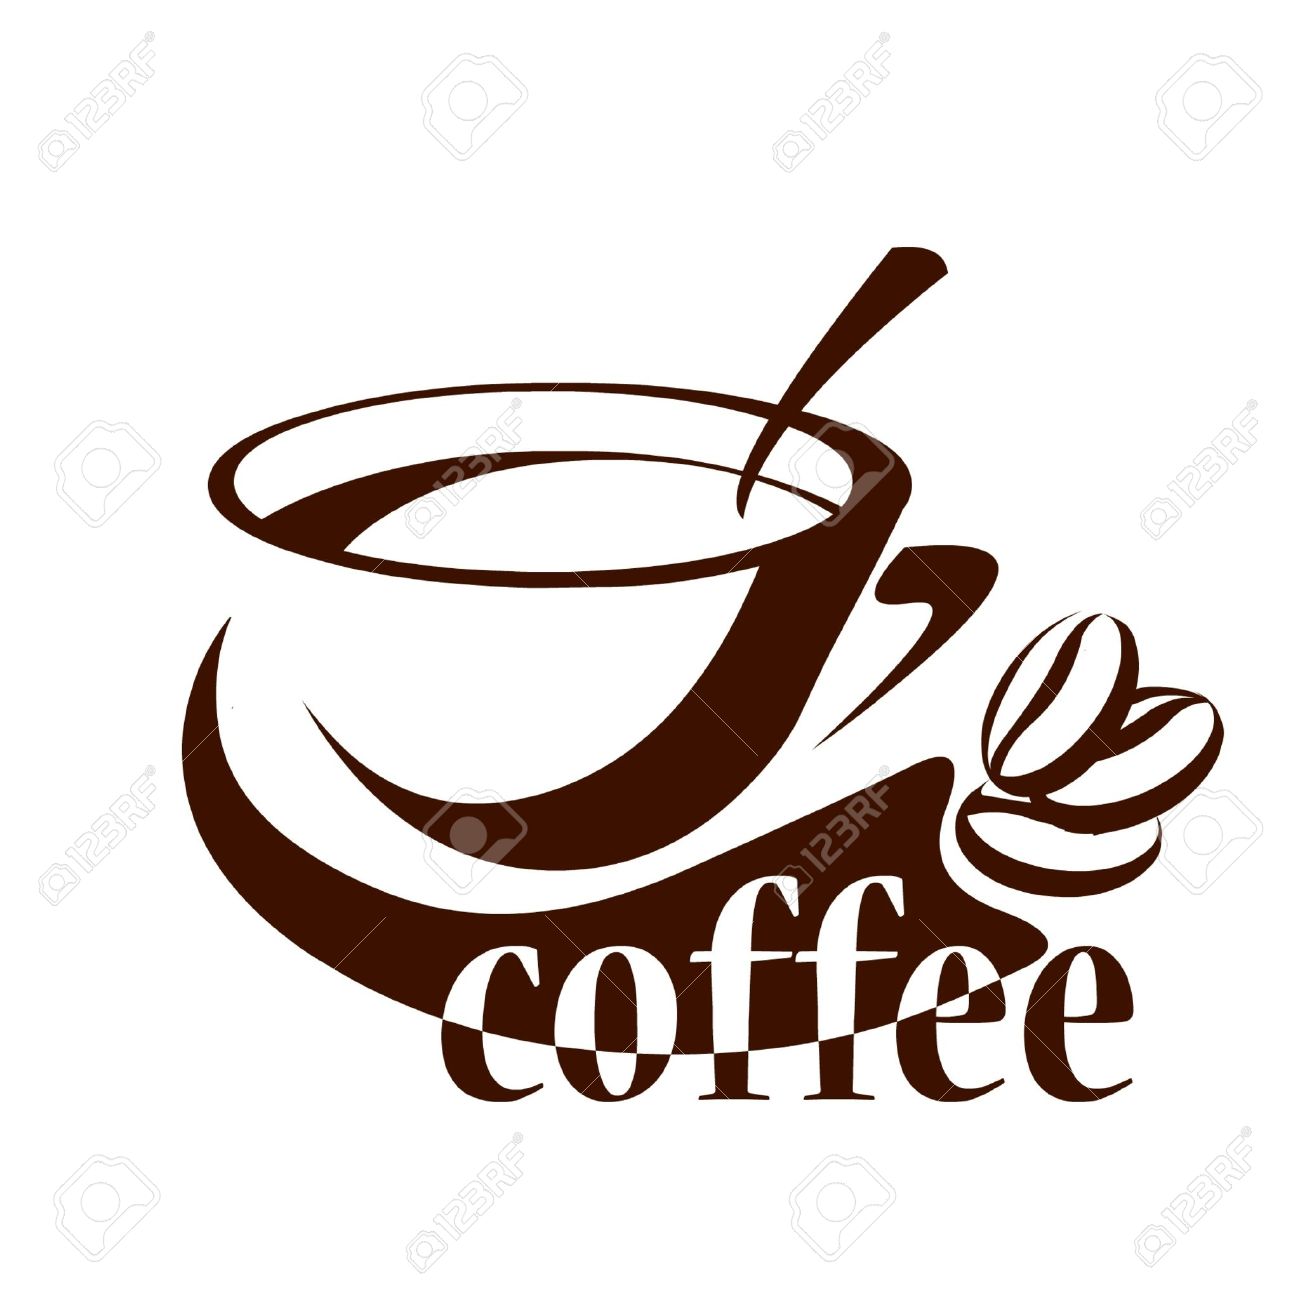 37,080 Mocha Coffee Stock Vector Illustration And Royalty Free.